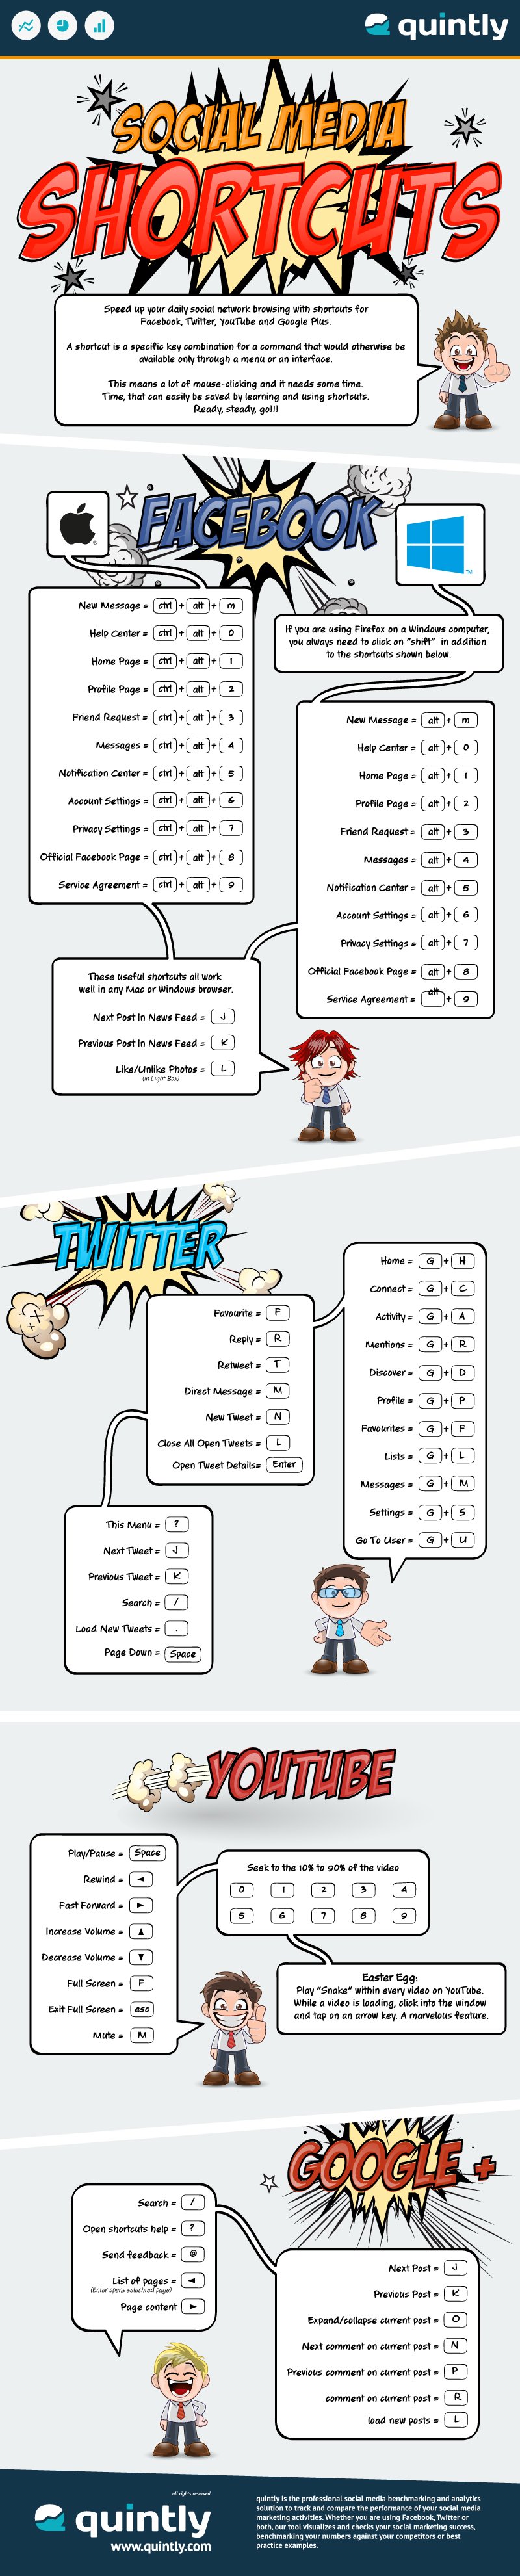 quintly_infographic_social_media_shortcuts